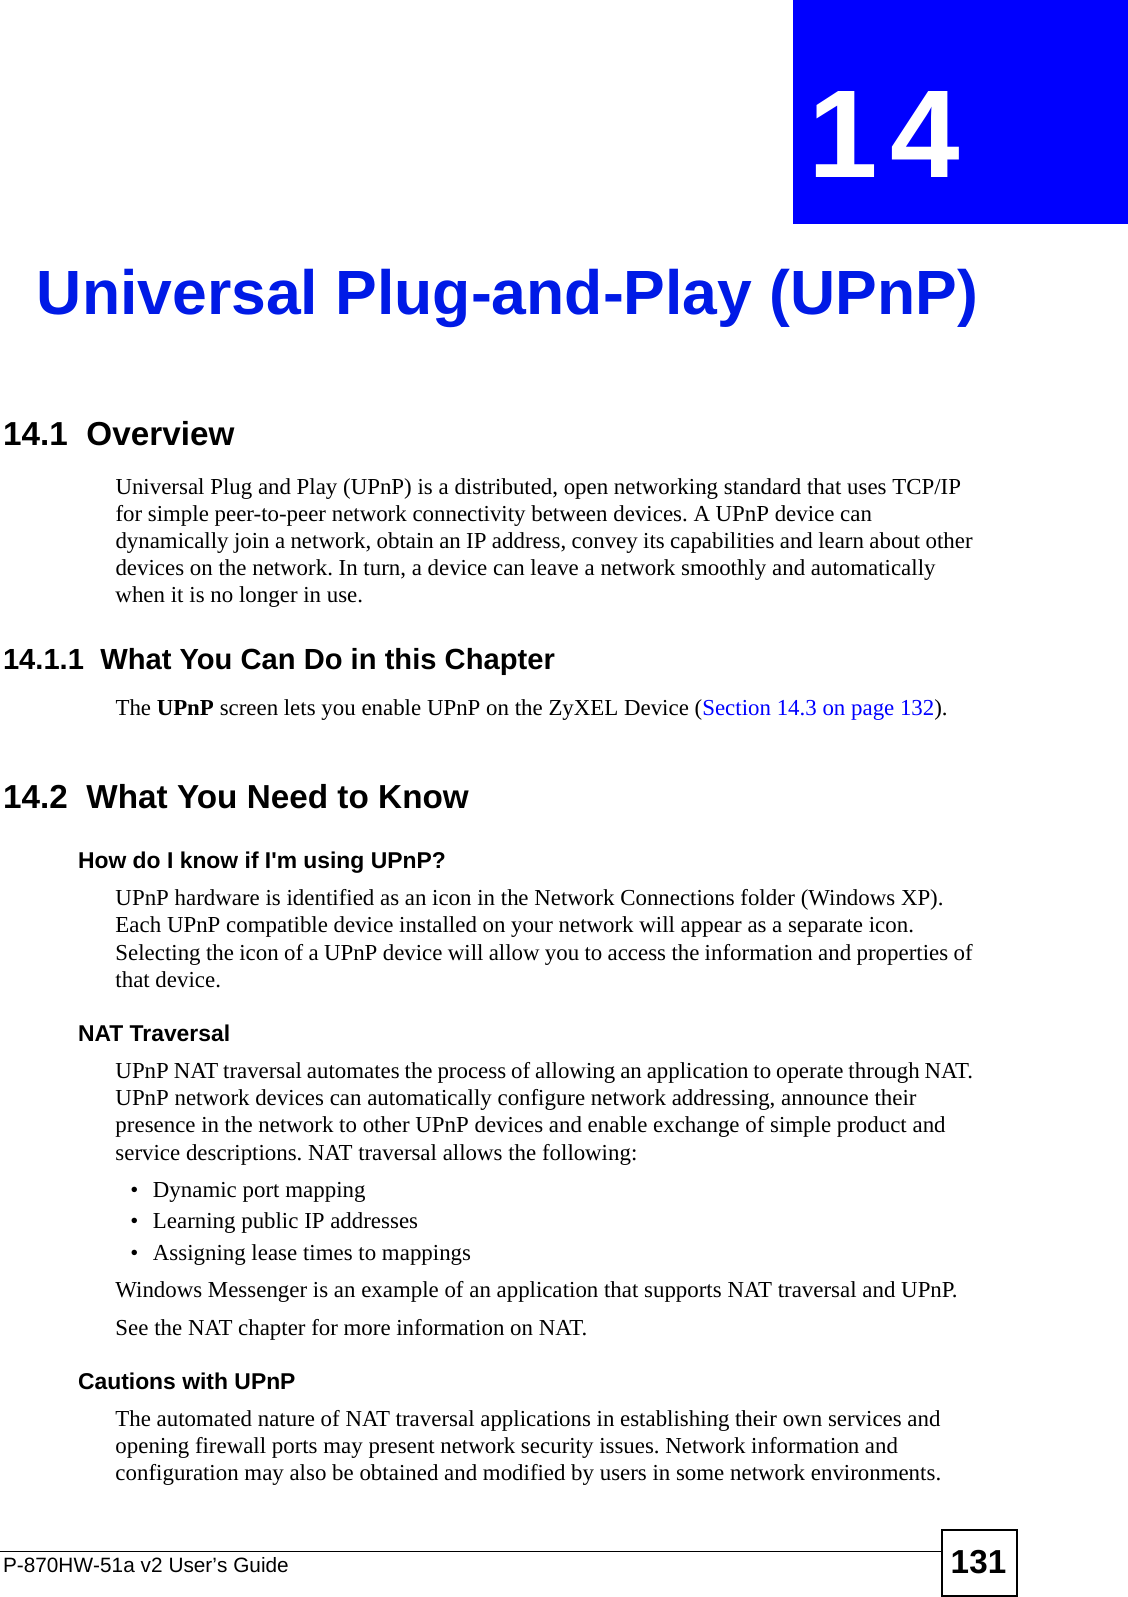 P-870HW-51a v2 User’s Guide 131CHAPTER  14 Universal Plug-and-Play (UPnP)14.1  Overview Universal Plug and Play (UPnP) is a distributed, open networking standard that uses TCP/IP for simple peer-to-peer network connectivity between devices. A UPnP device can dynamically join a network, obtain an IP address, convey its capabilities and learn about other devices on the network. In turn, a device can leave a network smoothly and automatically when it is no longer in use.14.1.1  What You Can Do in this ChapterThe UPnP screen lets you enable UPnP on the ZyXEL Device (Section 14.3 on page 132).14.2  What You Need to KnowHow do I know if I&apos;m using UPnP? UPnP hardware is identified as an icon in the Network Connections folder (Windows XP). Each UPnP compatible device installed on your network will appear as a separate icon. Selecting the icon of a UPnP device will allow you to access the information and properties of that device. NAT TraversalUPnP NAT traversal automates the process of allowing an application to operate through NAT. UPnP network devices can automatically configure network addressing, announce their presence in the network to other UPnP devices and enable exchange of simple product and service descriptions. NAT traversal allows the following:• Dynamic port mapping• Learning public IP addresses• Assigning lease times to mappingsWindows Messenger is an example of an application that supports NAT traversal and UPnP. See the NAT chapter for more information on NAT.Cautions with UPnPThe automated nature of NAT traversal applications in establishing their own services and opening firewall ports may present network security issues. Network information and configuration may also be obtained and modified by users in some network environments. 